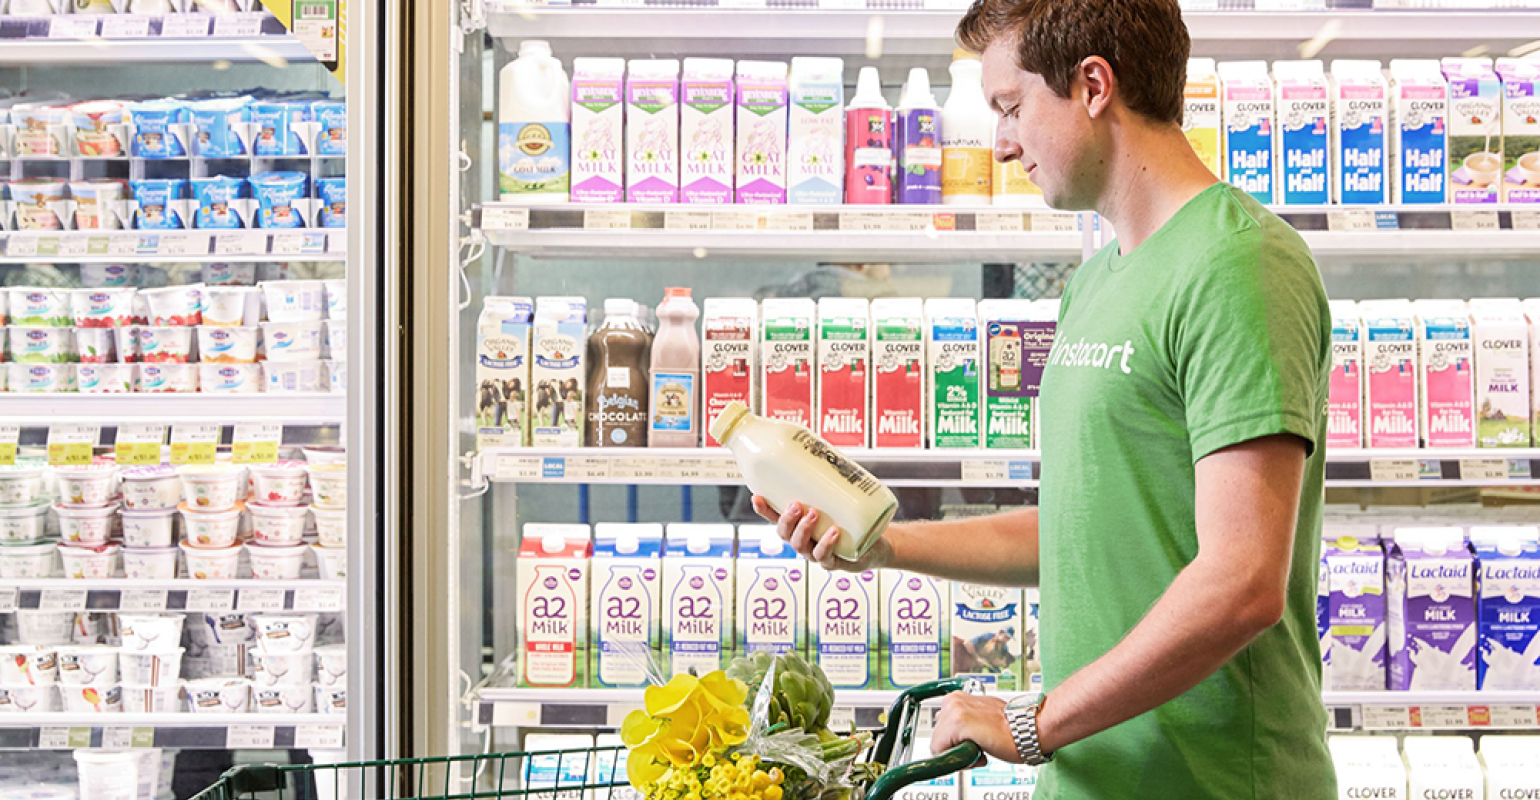 Working for Instacart: What It's Like for Shopper During Covid